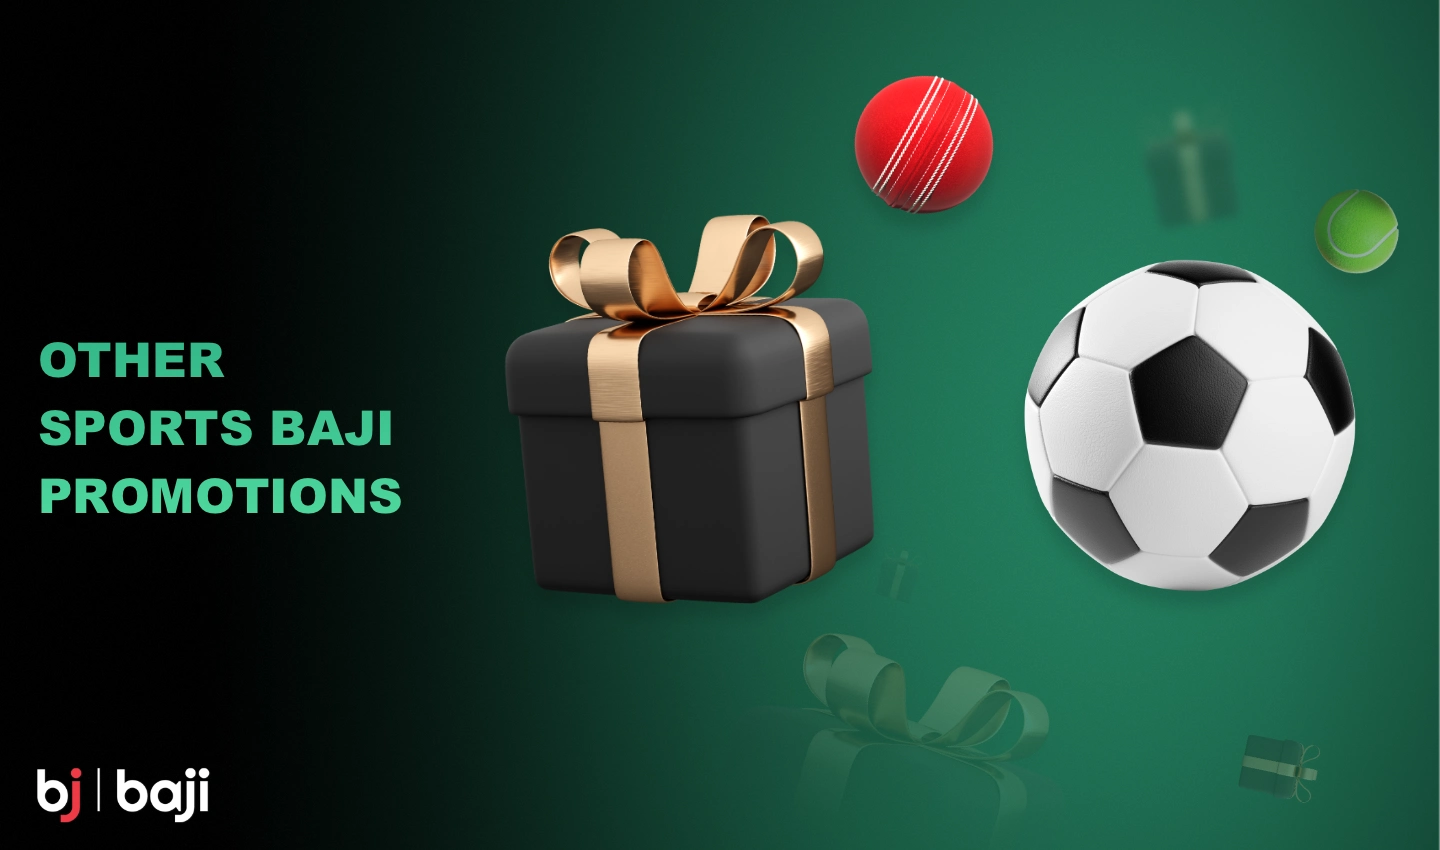 Baji offers its users additional promotions for sports betting